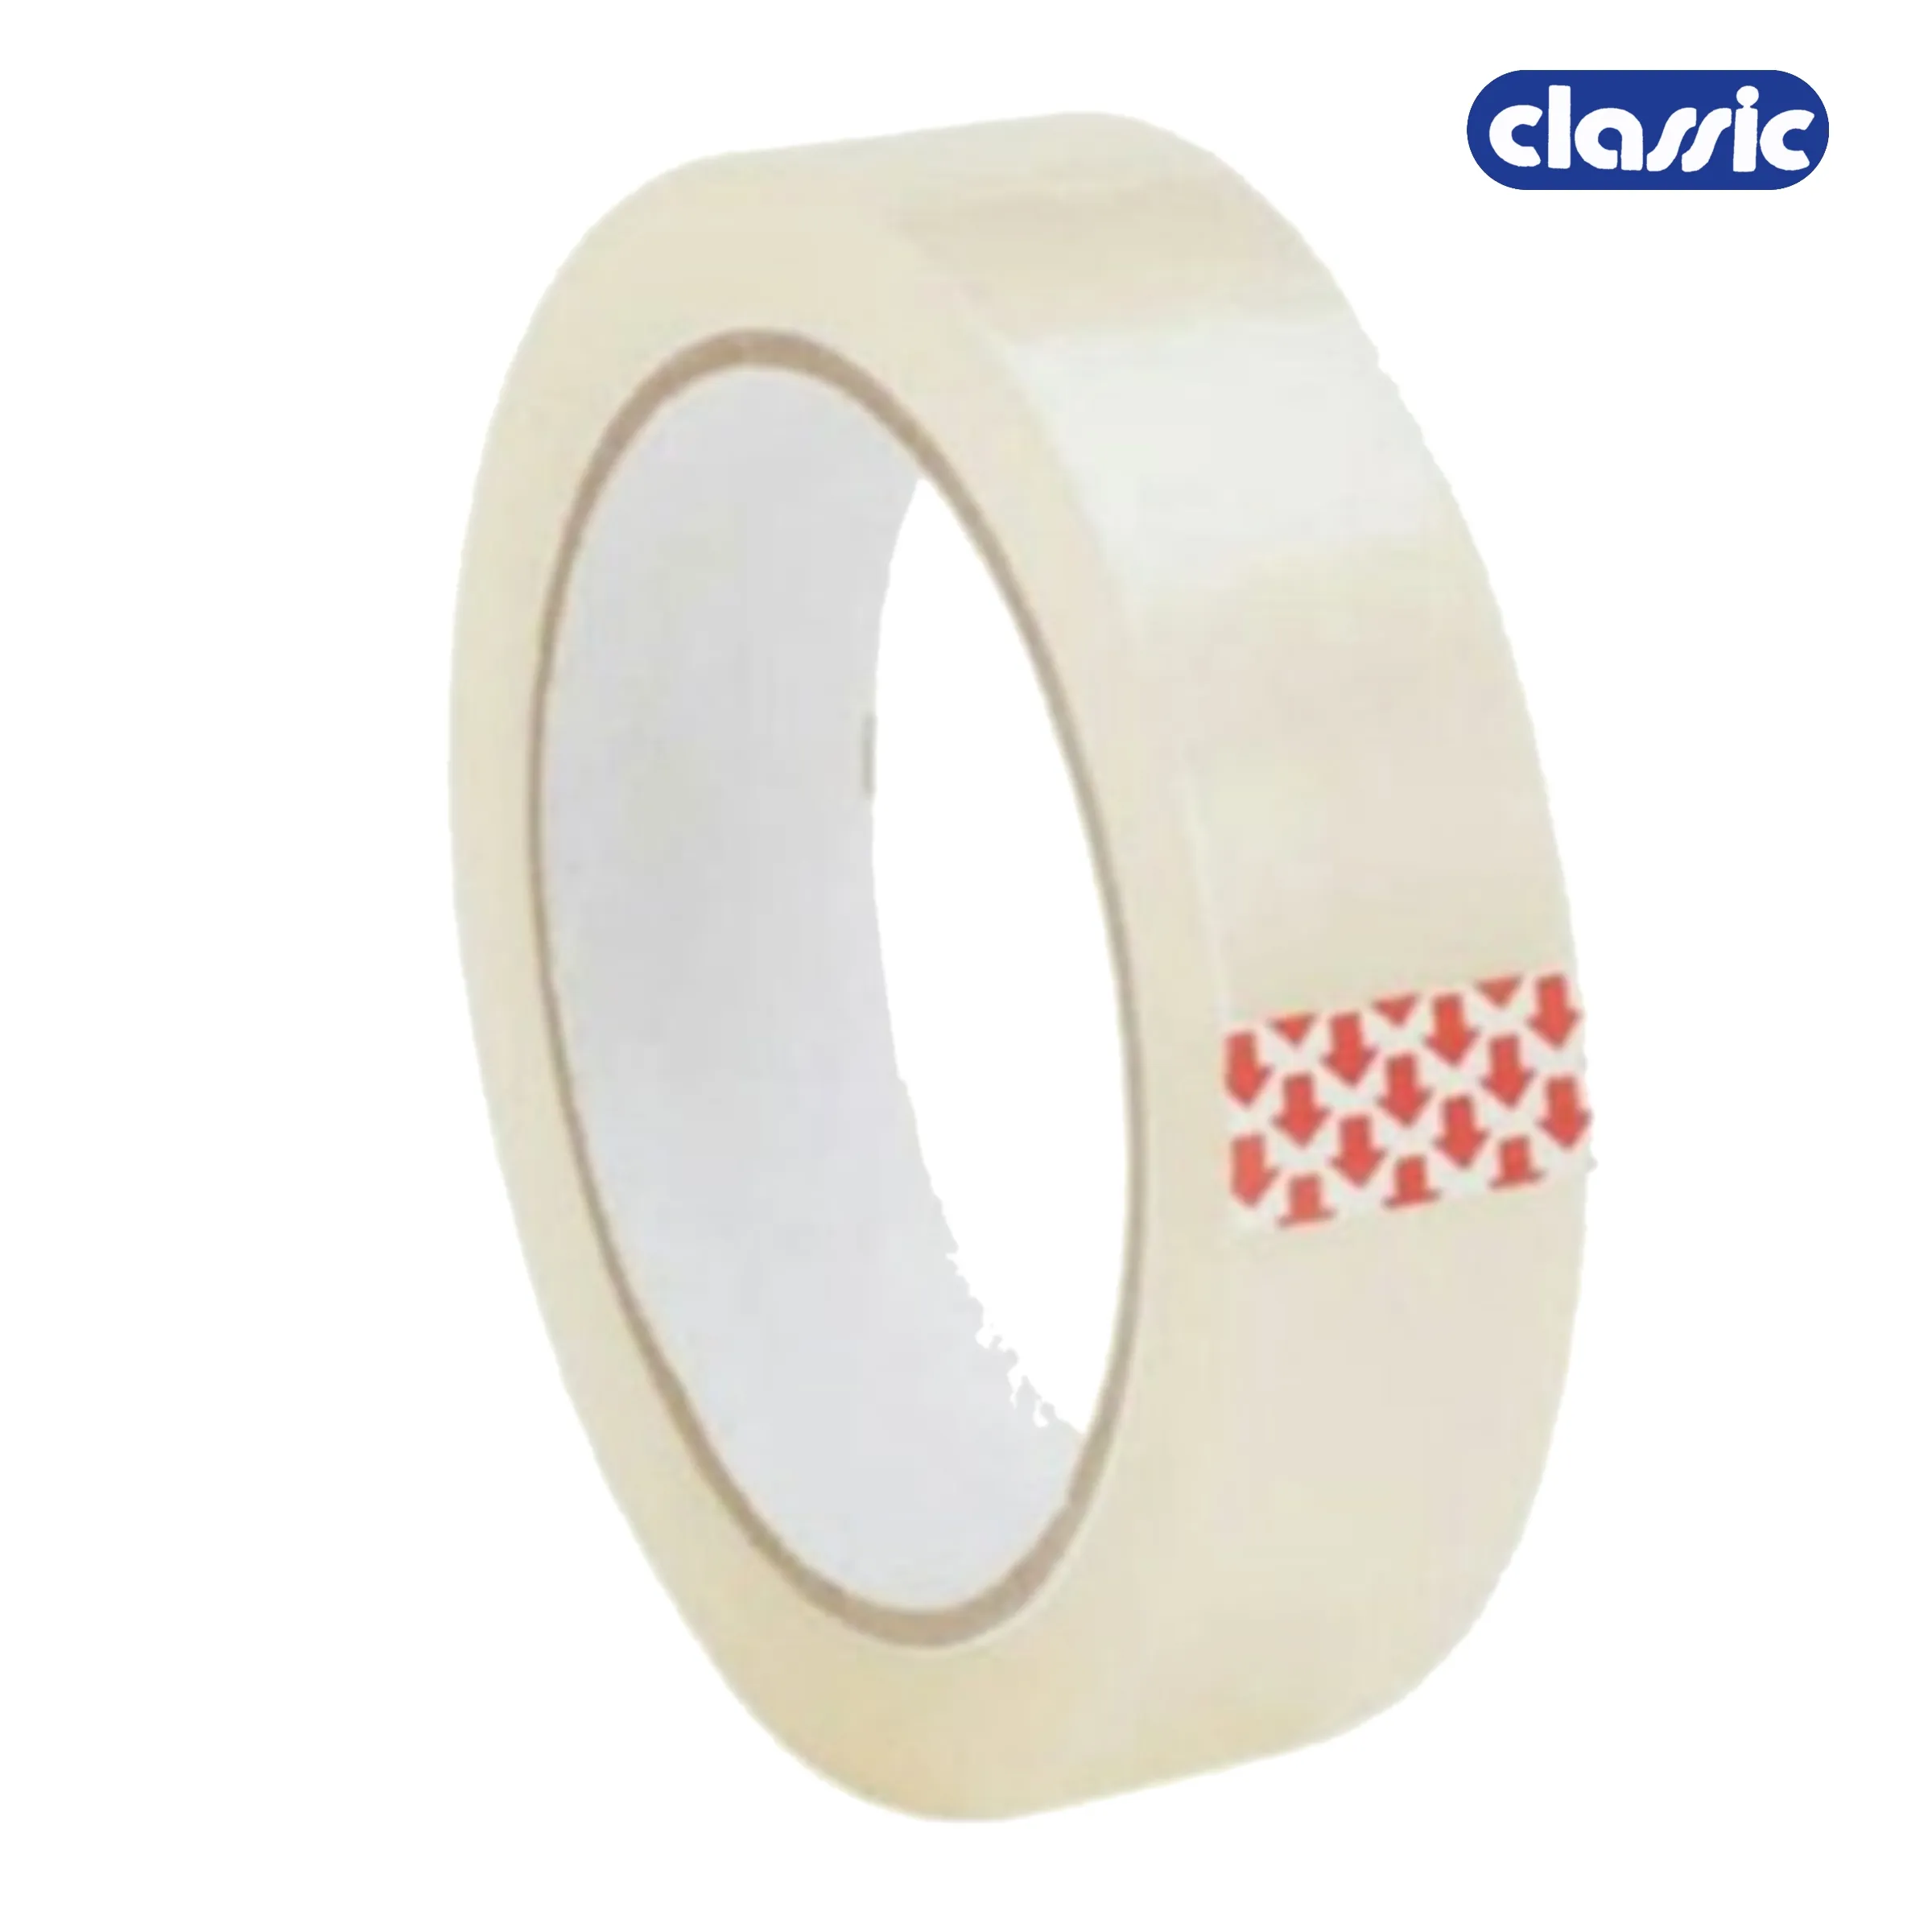 Classic 30 Micron 24 mm/1 Inch Transparent Self Adhesive Tape, Premium Quality, Pack of 1 Roll